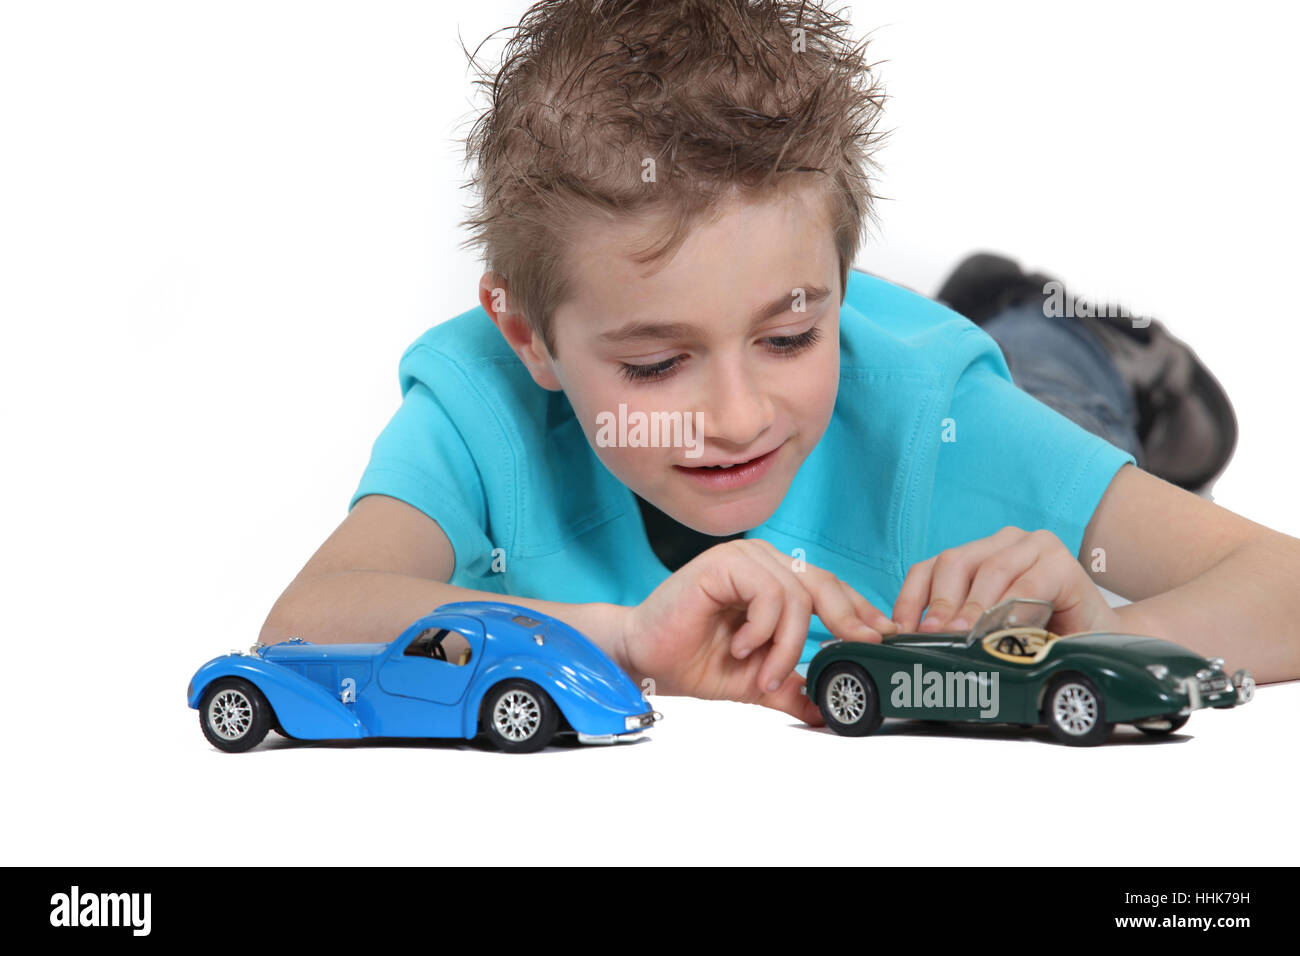 blue, bedroom, british, boy, lad, male youngster, activity, cars, automobiles, Stock Photo